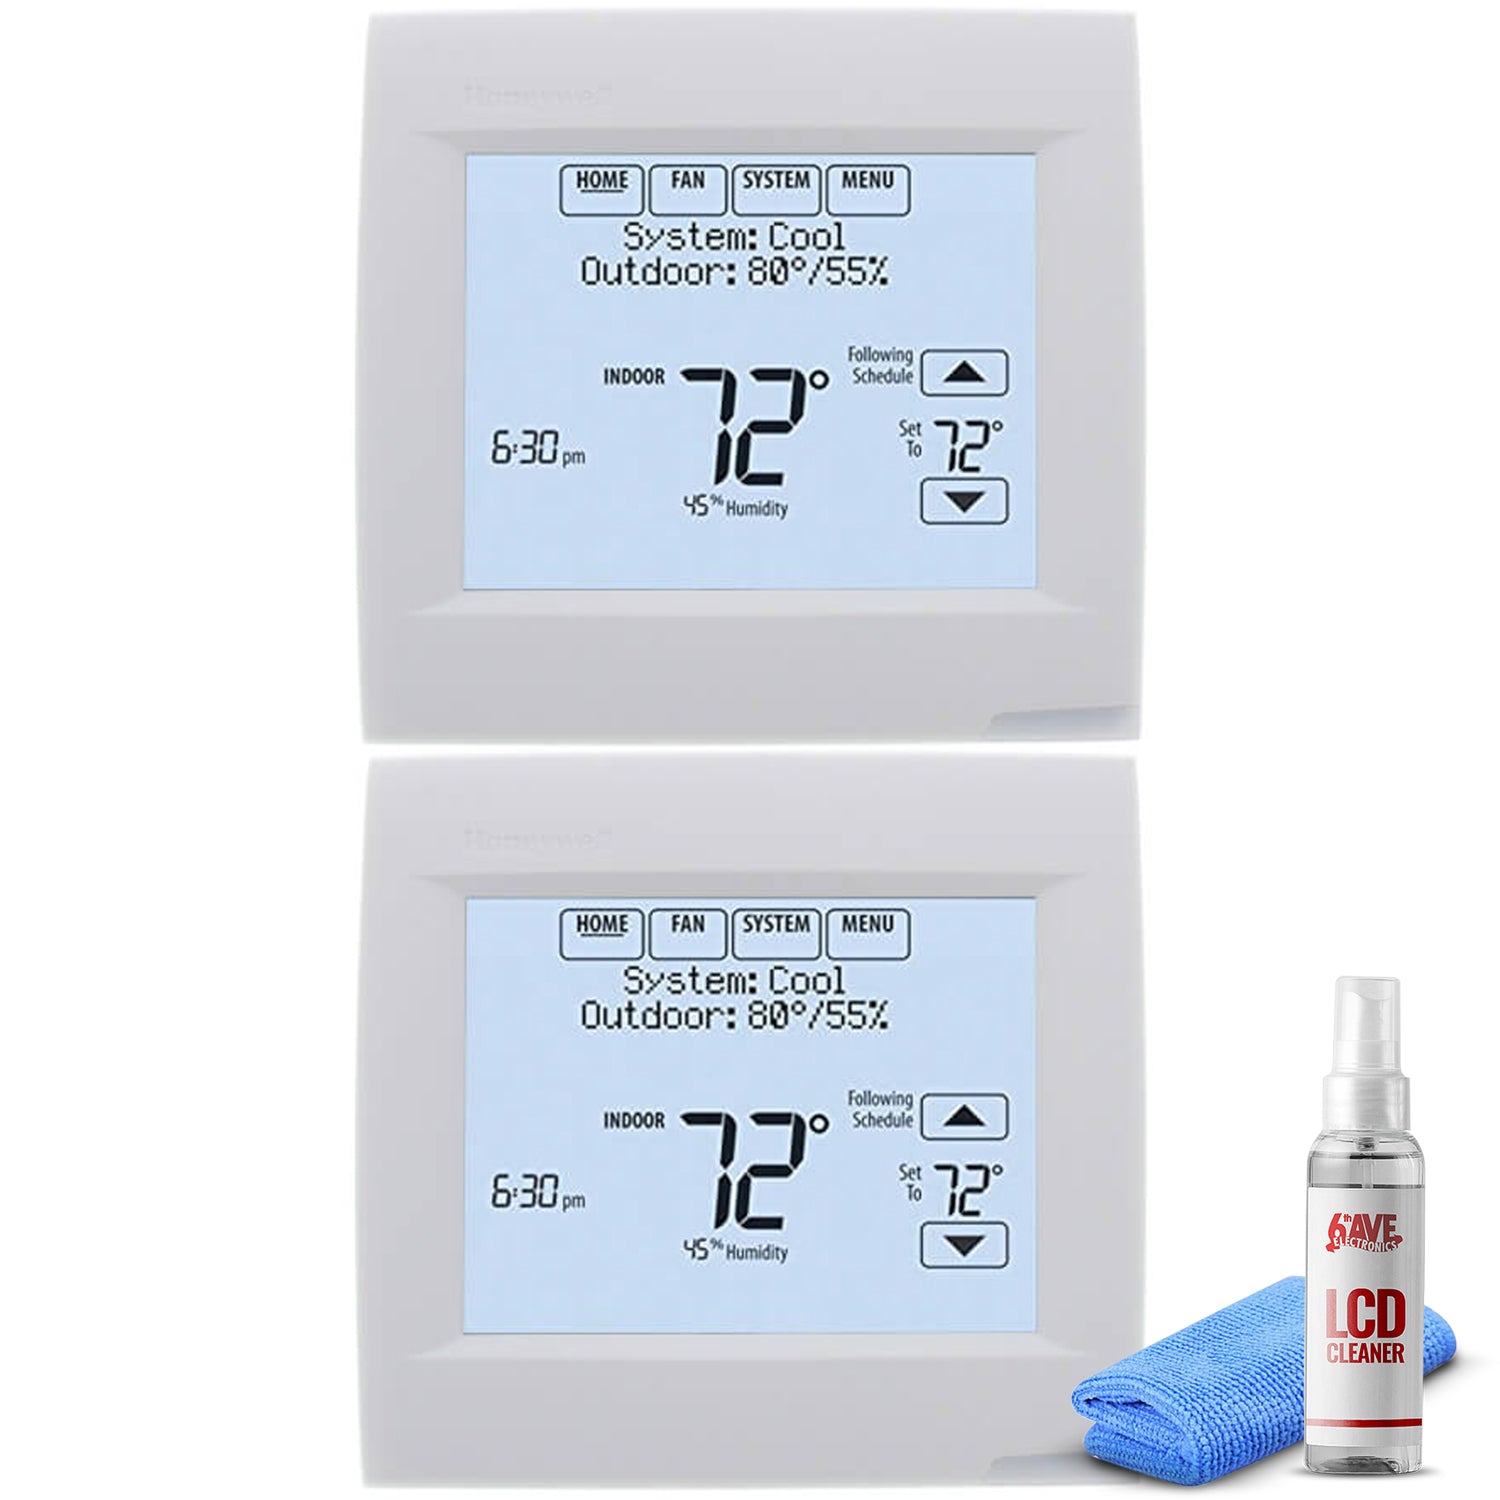 2-Pack Honeywell VisionPRO 8000 Thermostat - White + LCD Cleaner